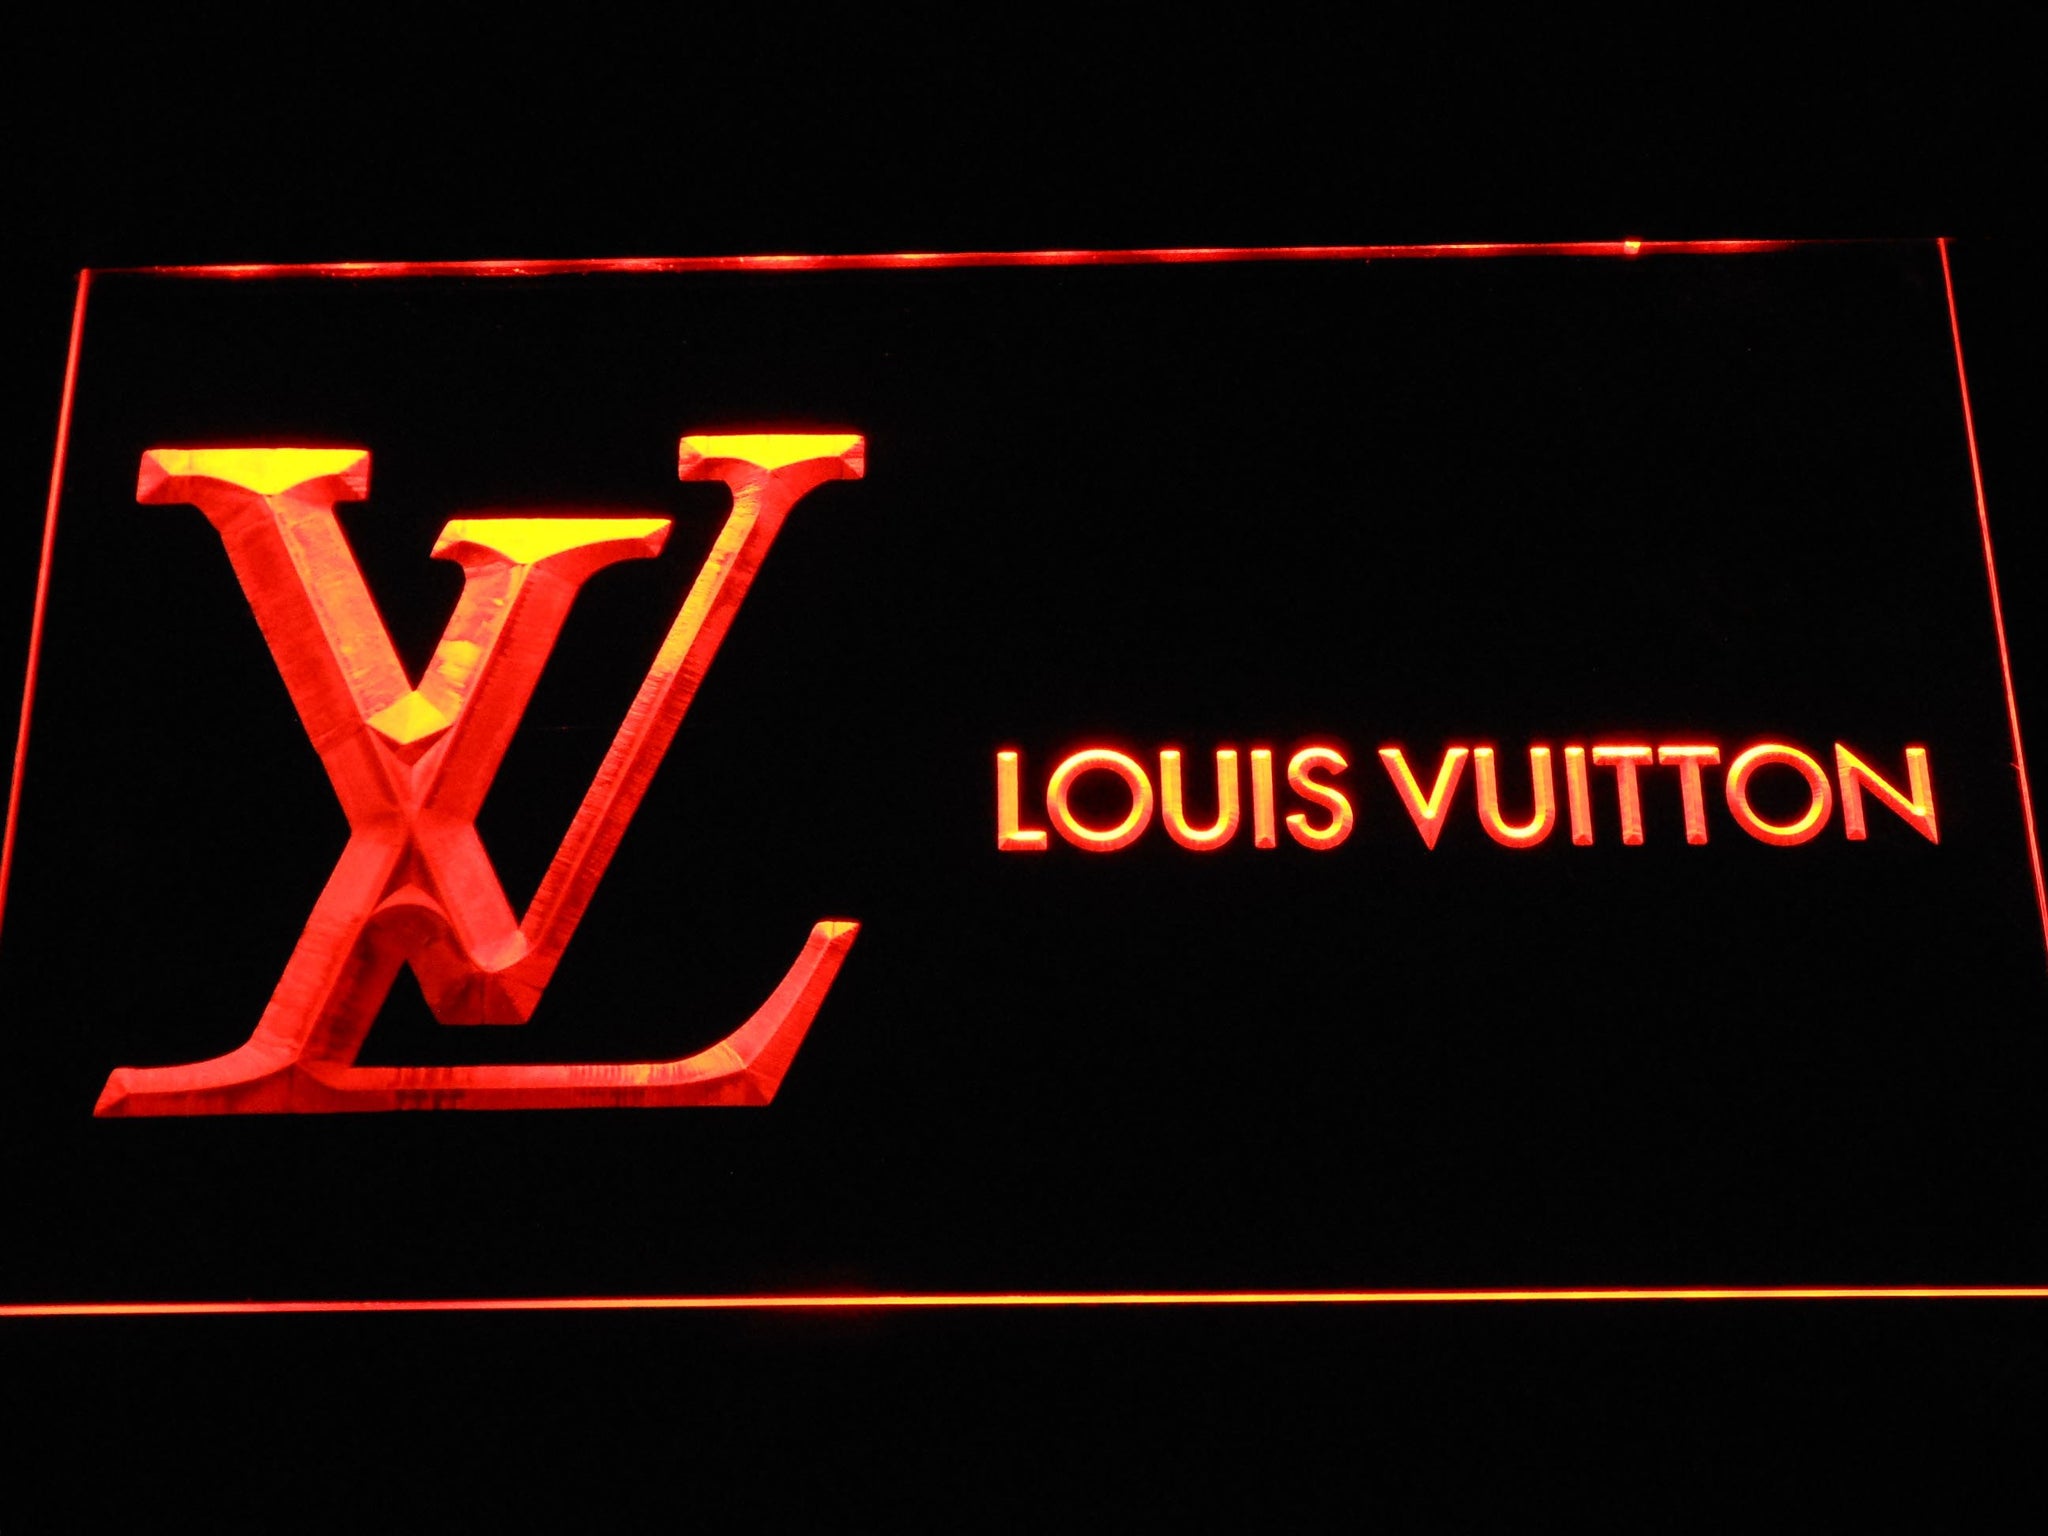 Louis Vuitton LED Neon Sign Electrical